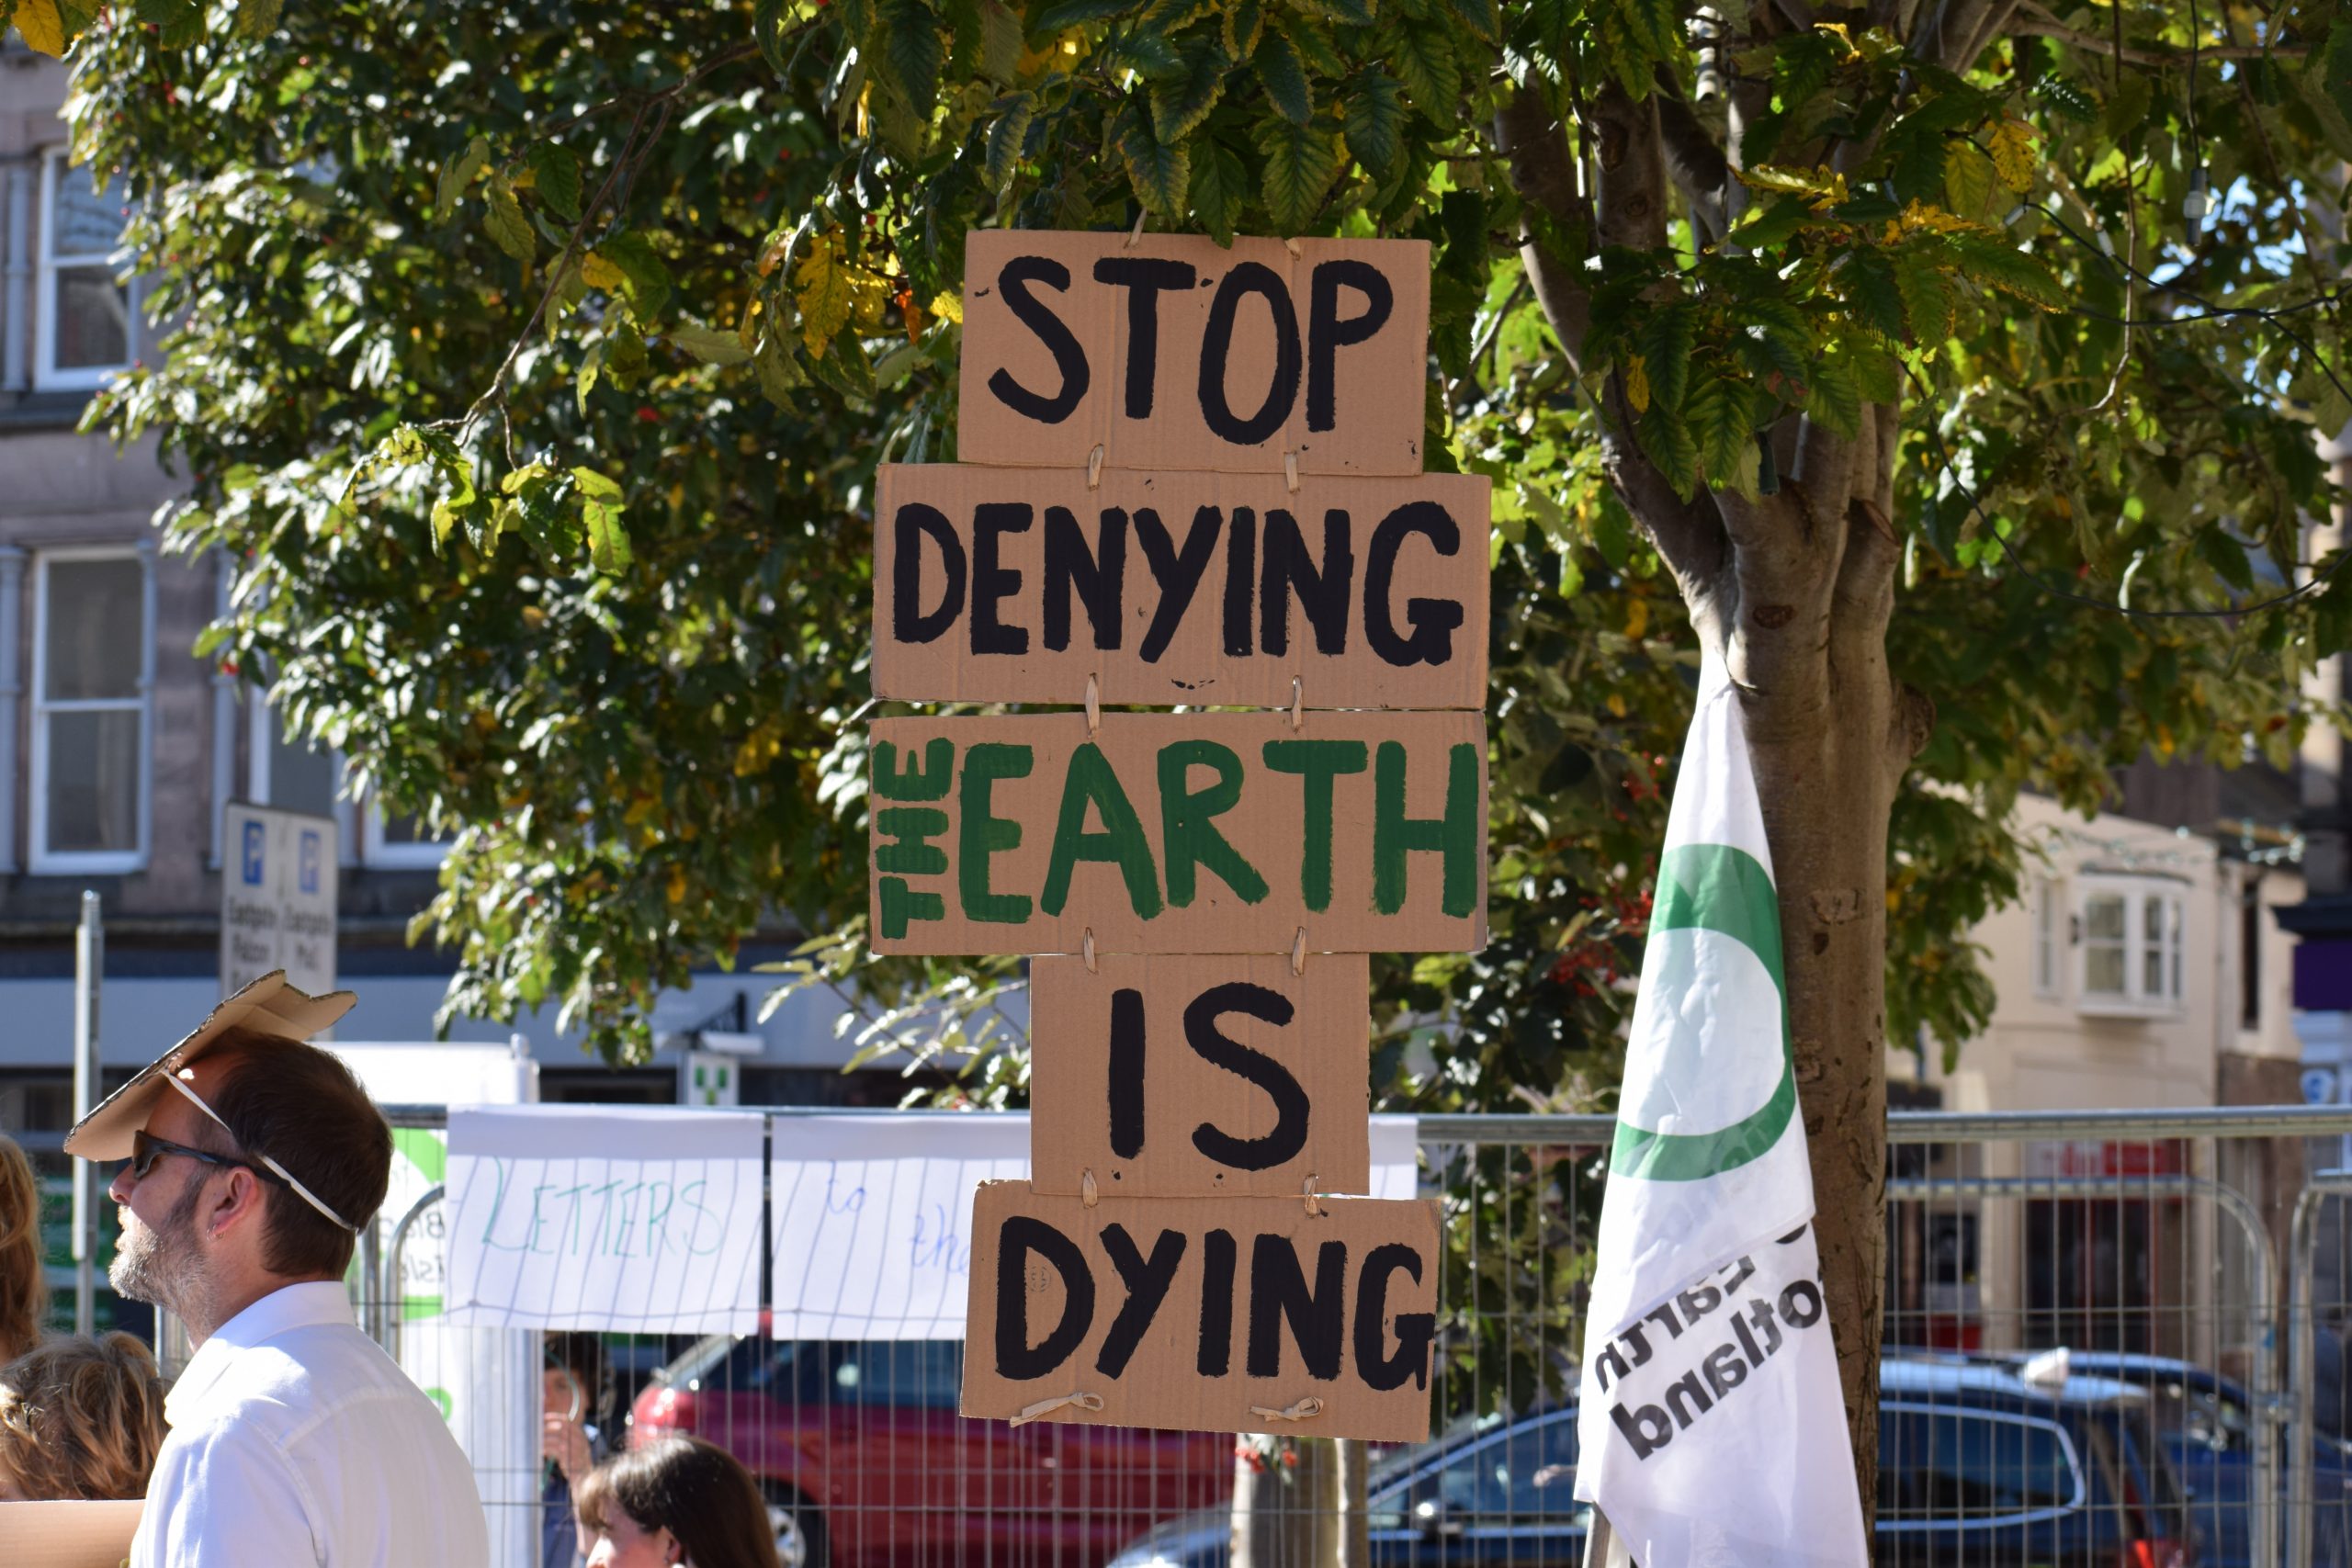 'Stop denying the Earth is dying' sign